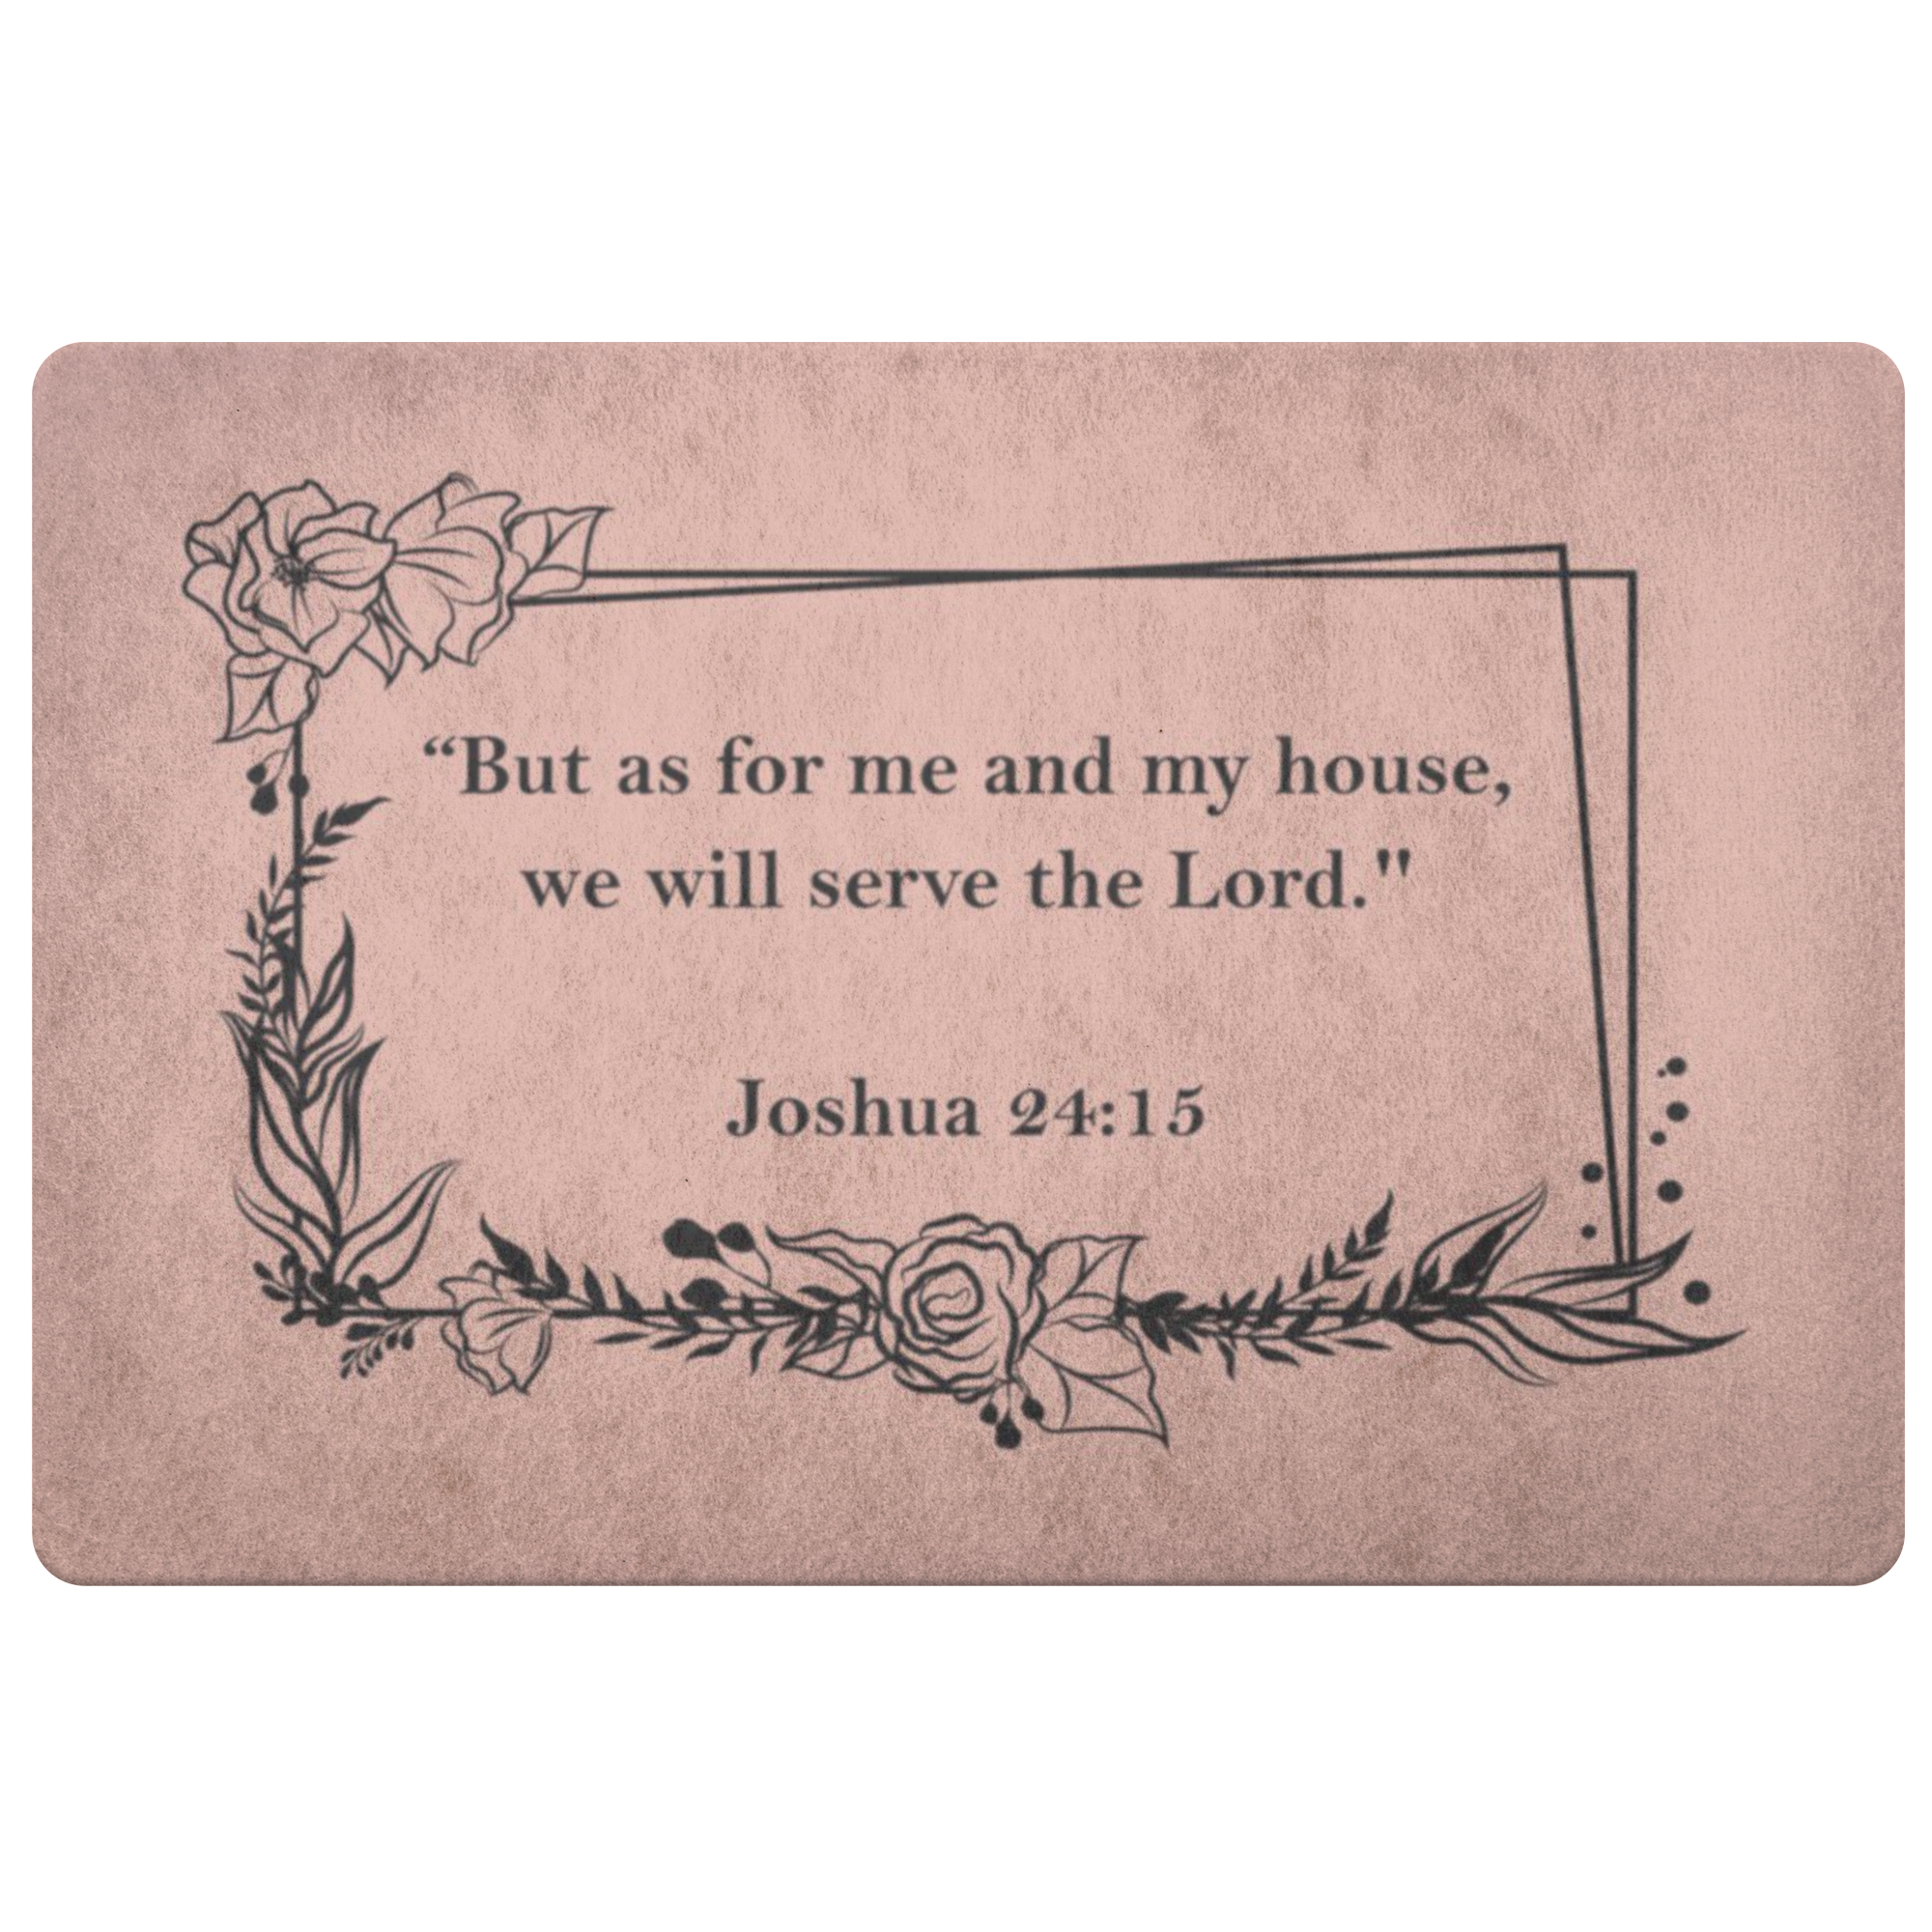 We Will Serve The Lord (Doormat)